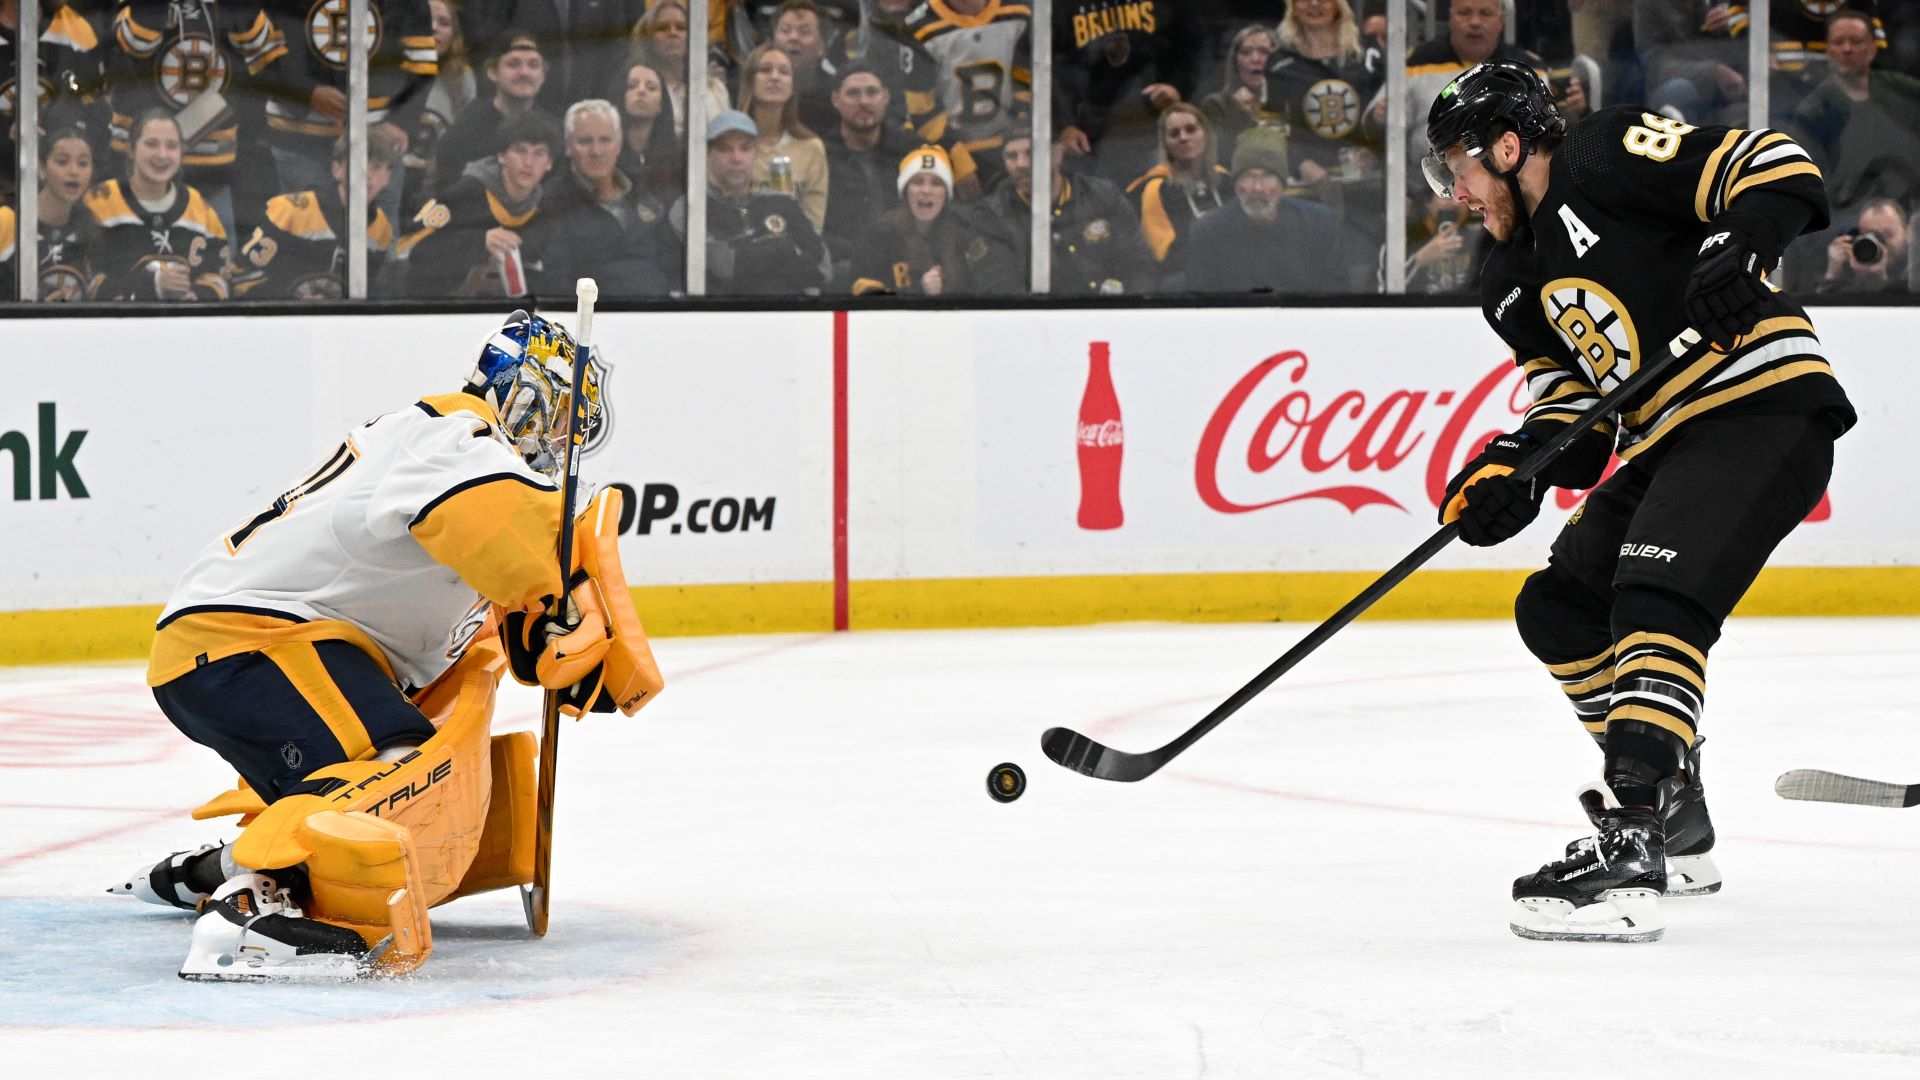 Bruins Playoffs 2019: Charlie Coyle's overtime goal gives Boston 3-2 win  over Columbus in Game 1 (video) 